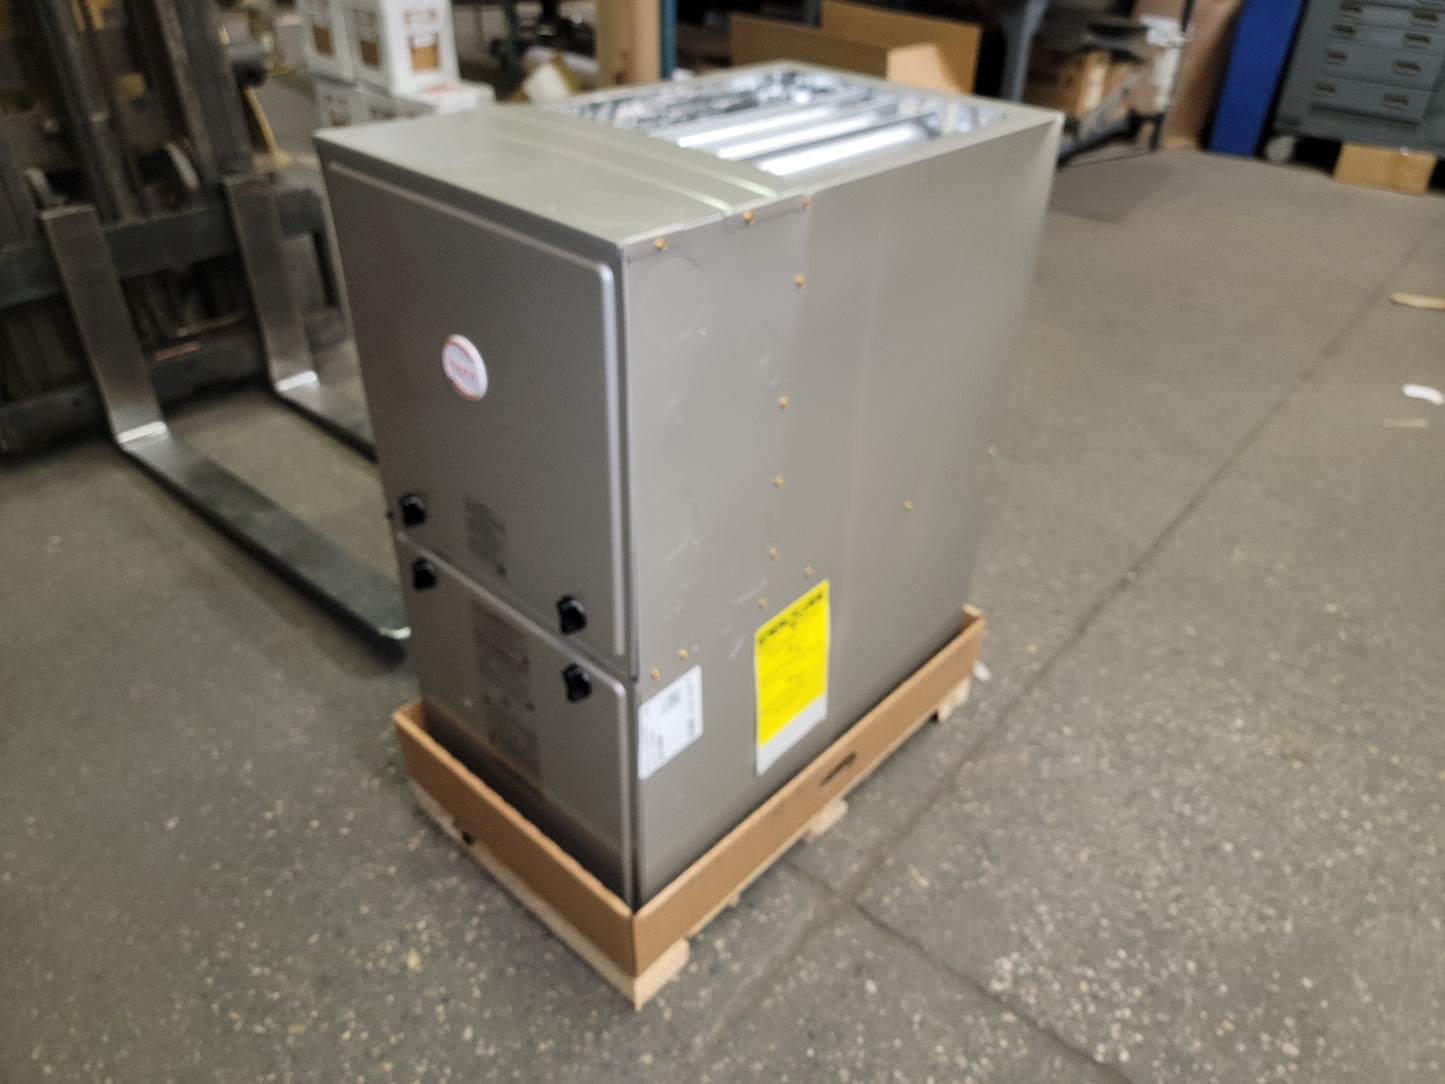 60,000 SINGLE STAGE MULTI-POSITION NON-COMMUNICATING FIXED SPEED ECM FURNACE 92% 120/60/1